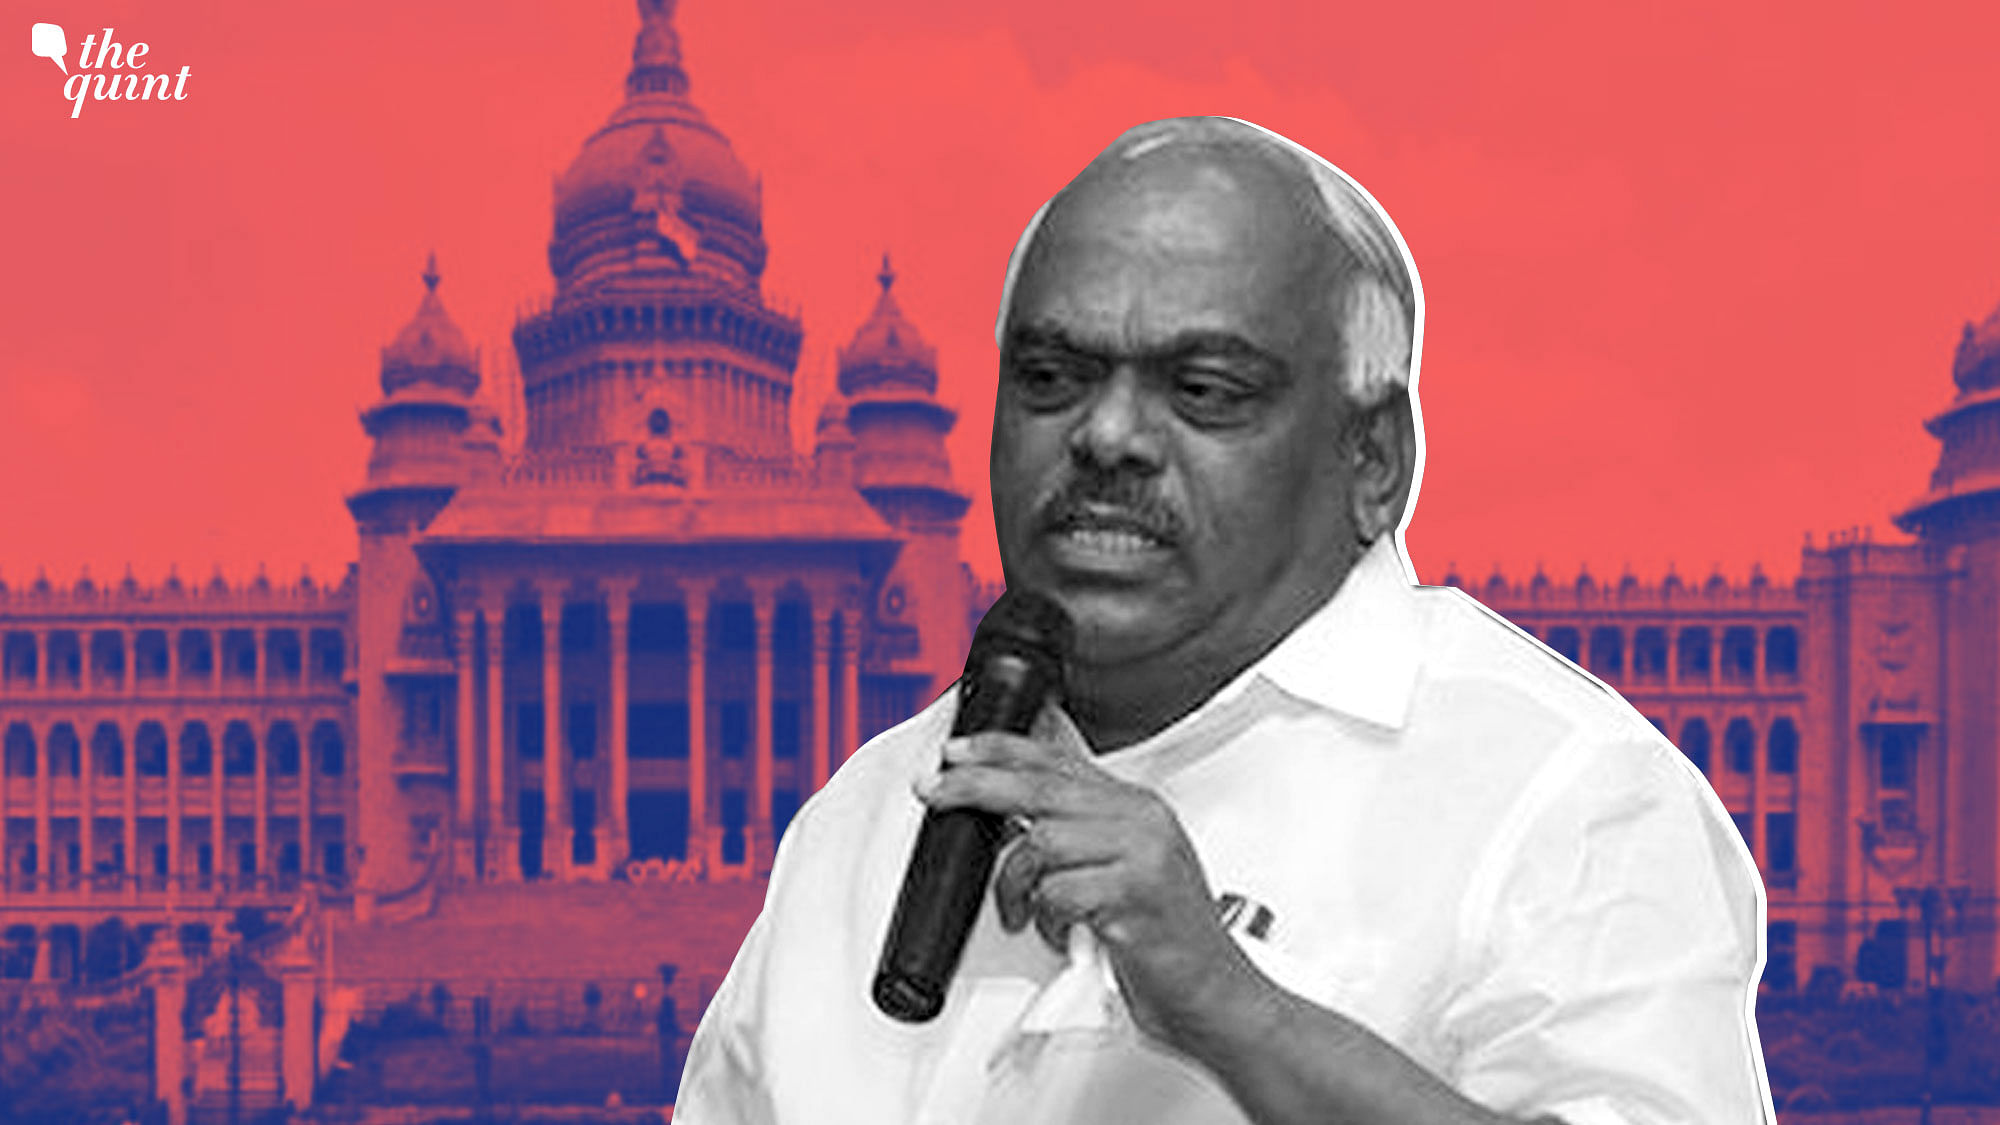 Known for his wit, Speaker Ramesh Kumar is the man of the moment in the Karnataka crisis.